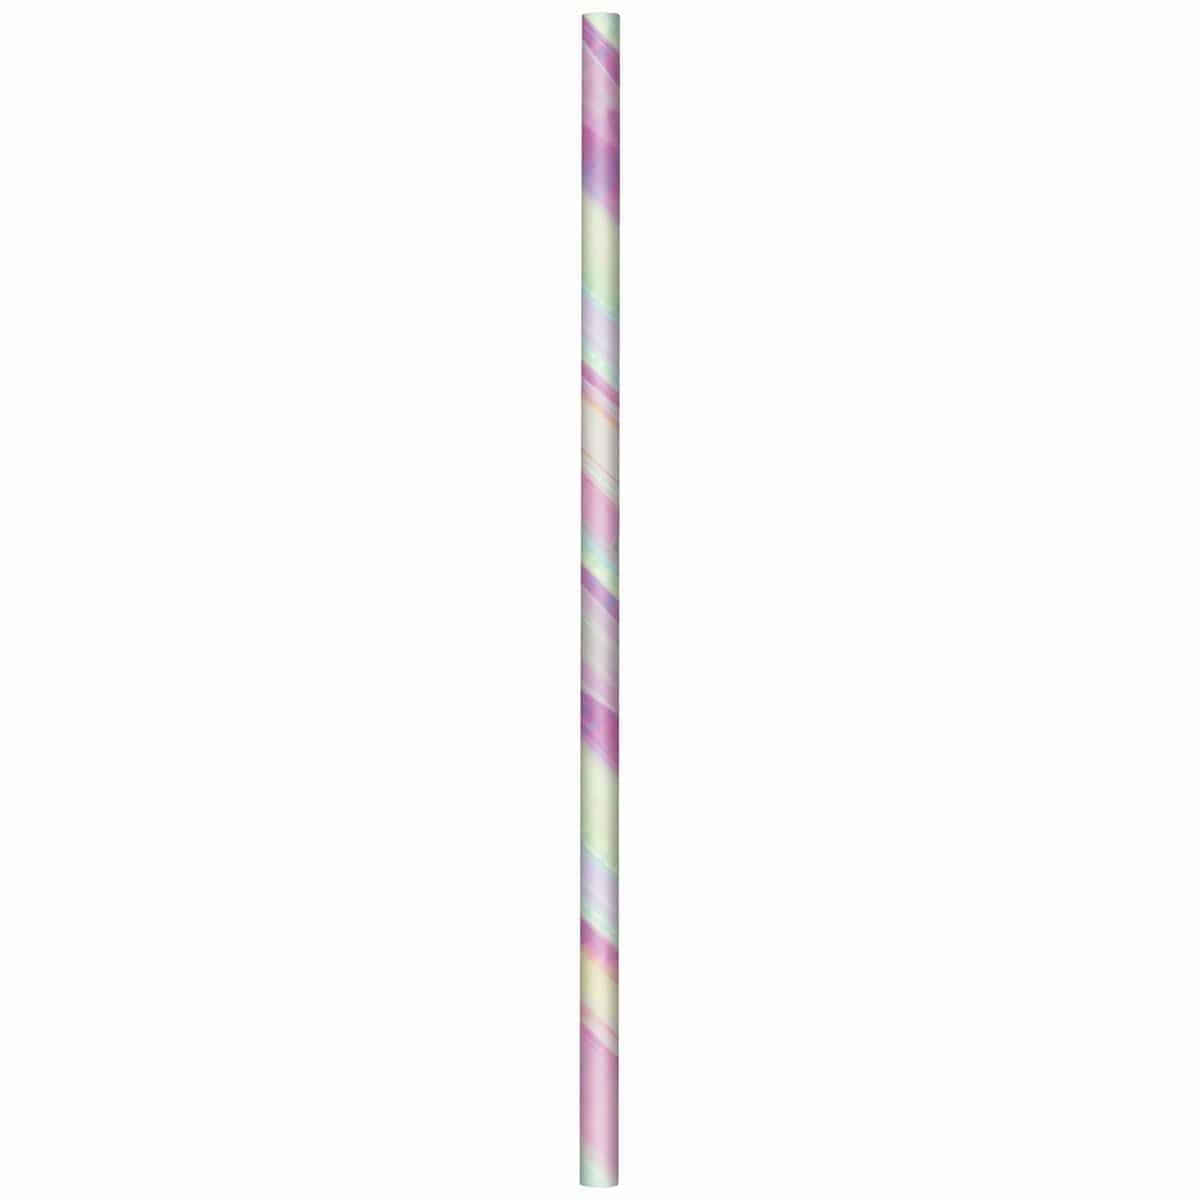 Buy Everyday Entertaining Iridescent Paper Straws, 24 per Package sold at Party Expert